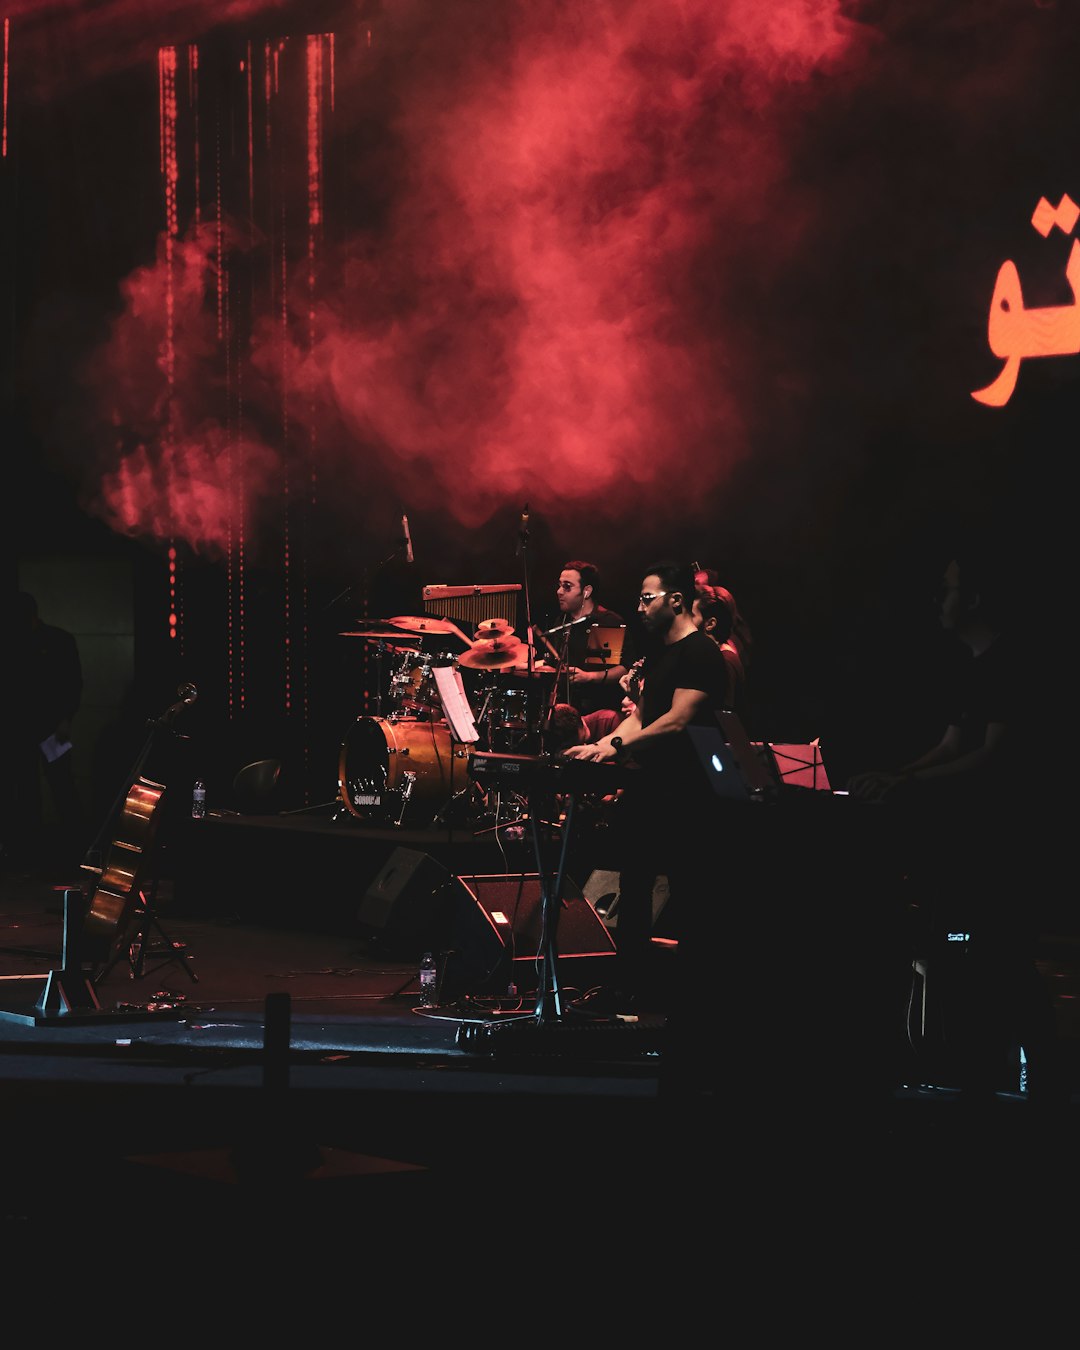 band performing on stage with red lights